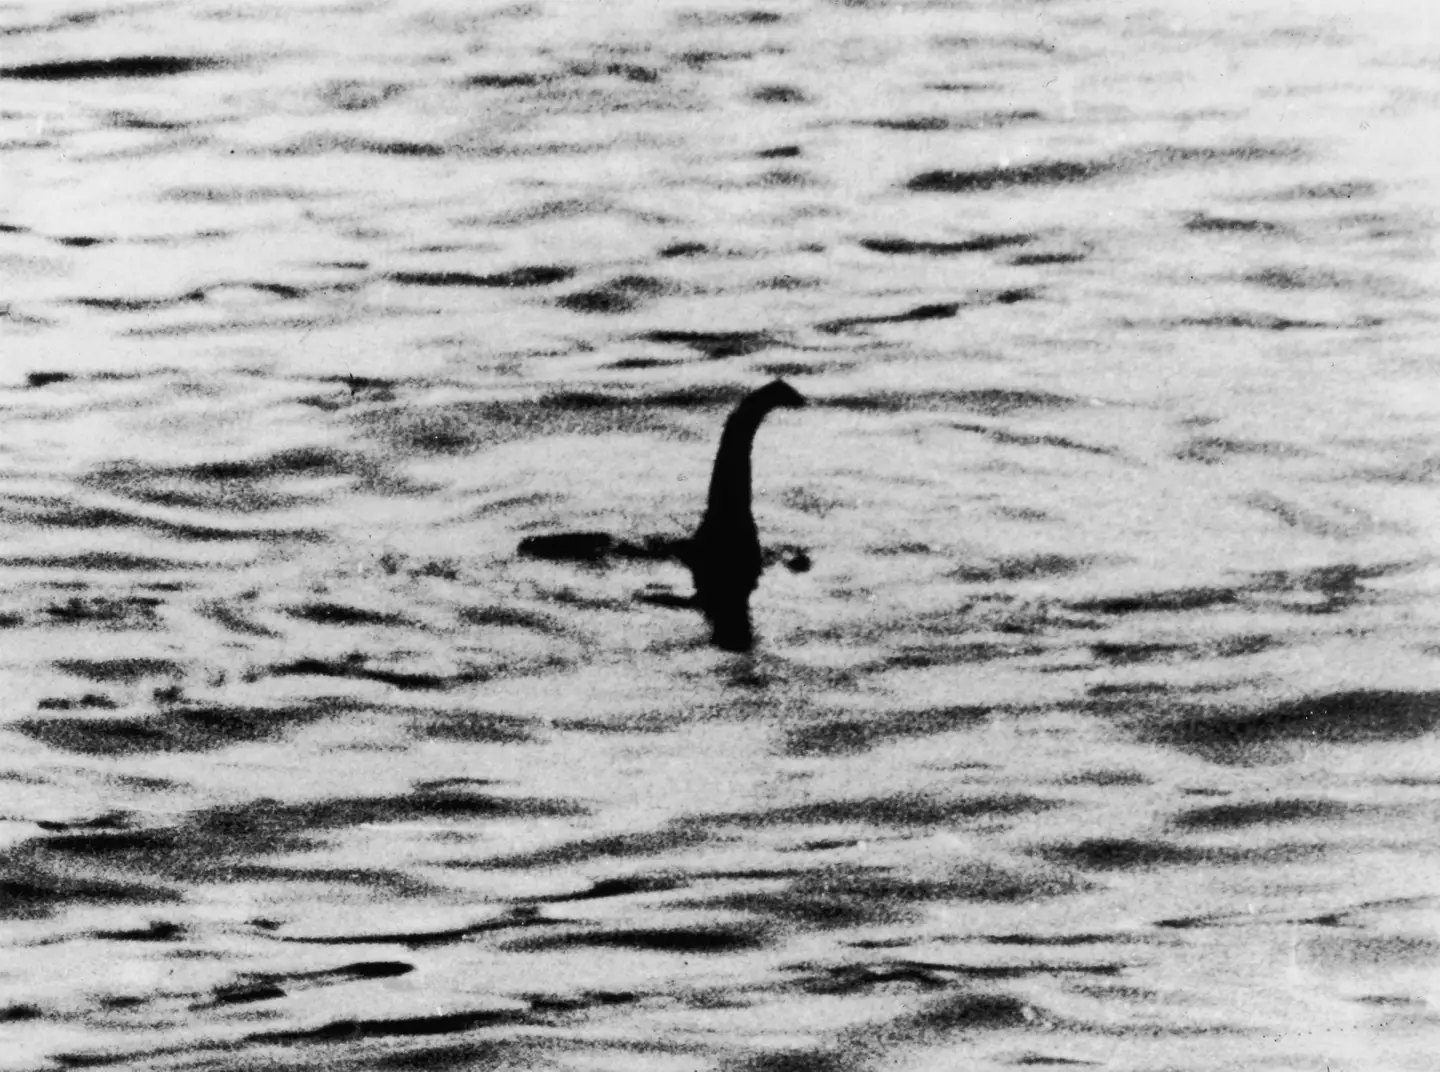 The Loch Ness monster was photographed 90 years ago today.